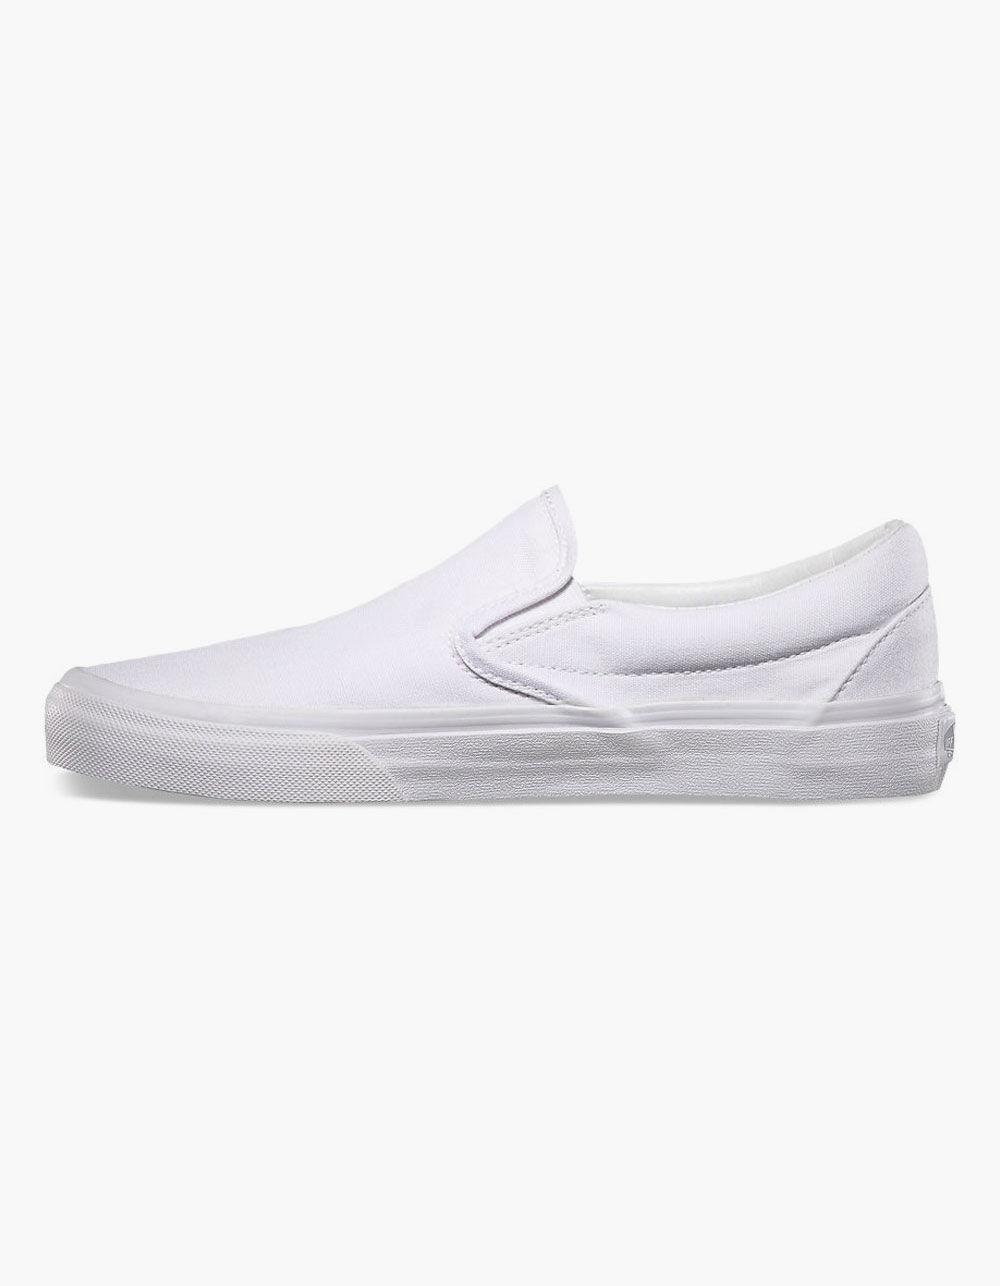 Vans Canvas Classic Slip-on Shoes - Size 4.5 in White for Men - Save 51 ...